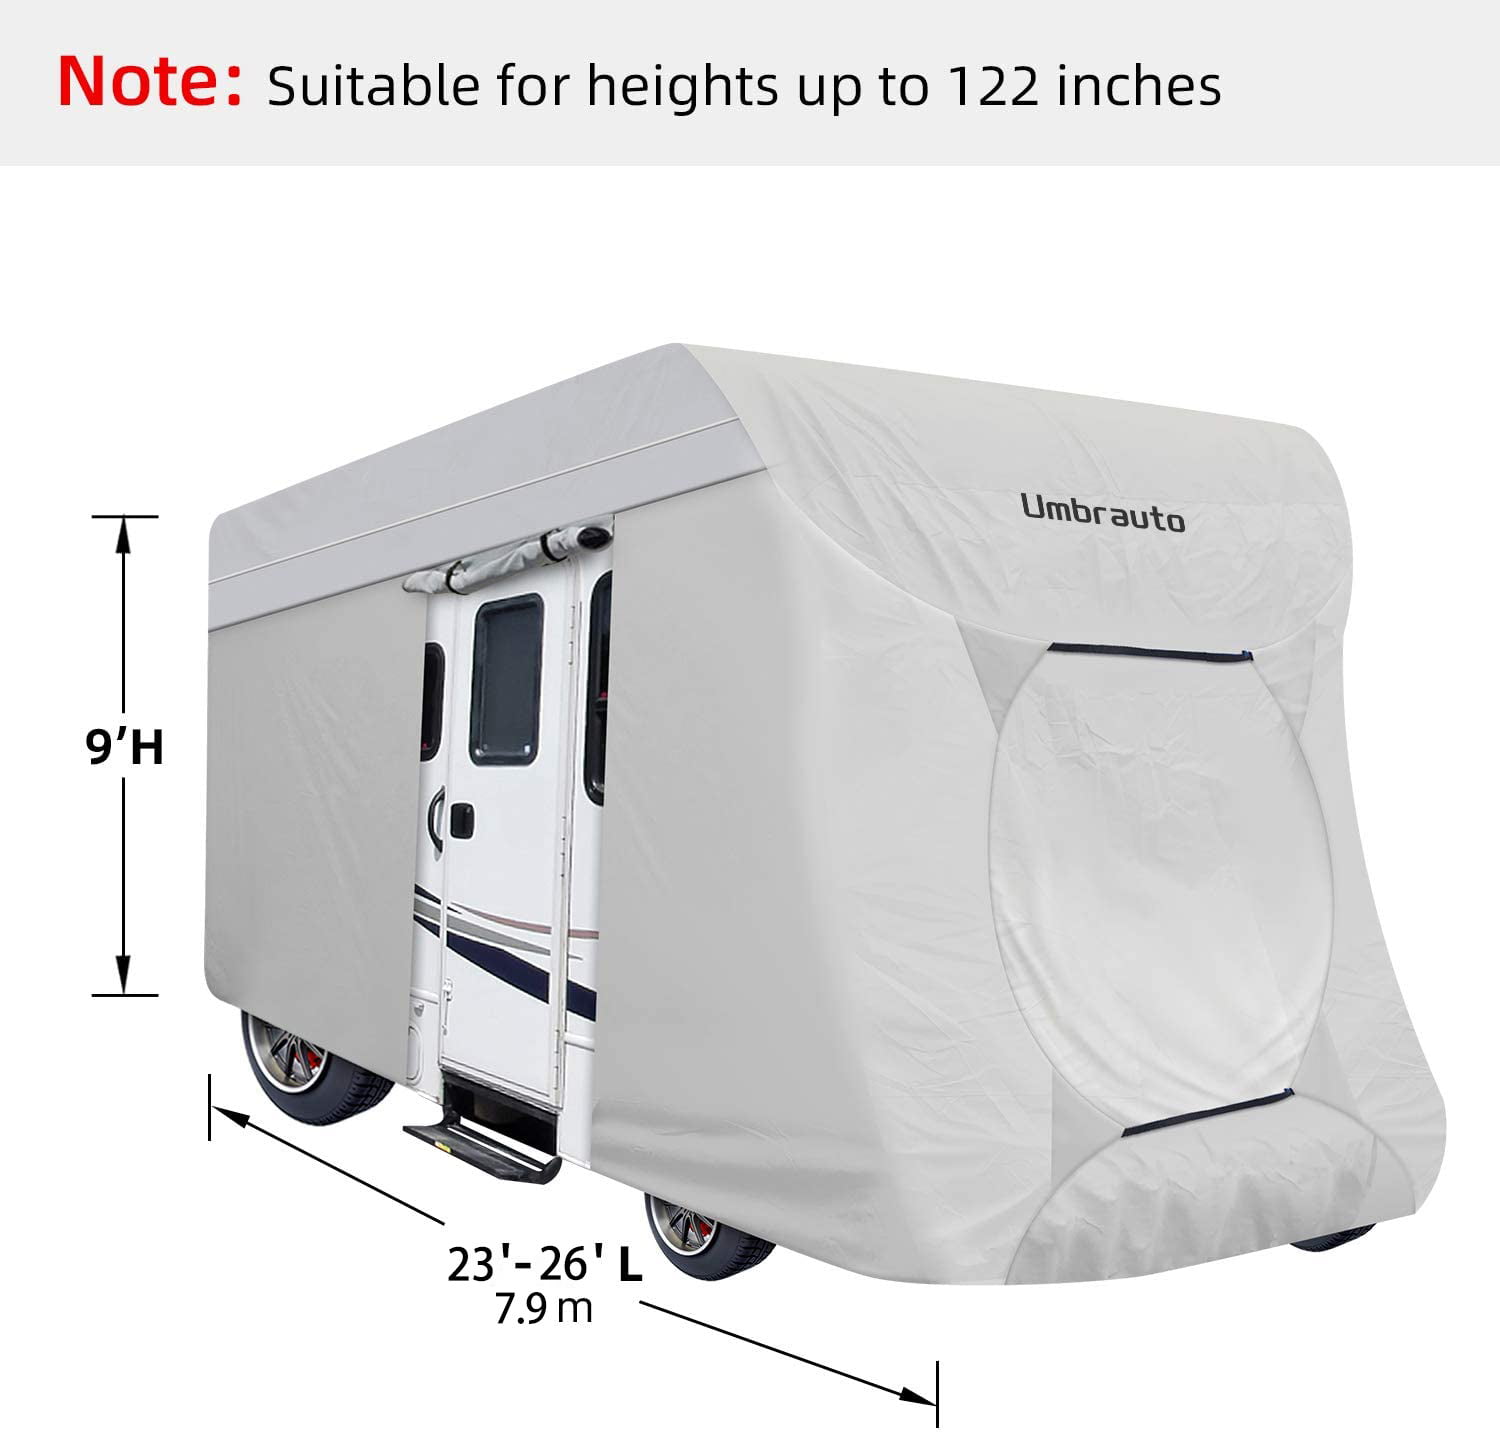 DikaSun Class C RV Cover Polypro 3 Layers Breathable Waterproof Ripstop Anti-UV RV Motorhome Cover Fits 29Ft to 32Ft 